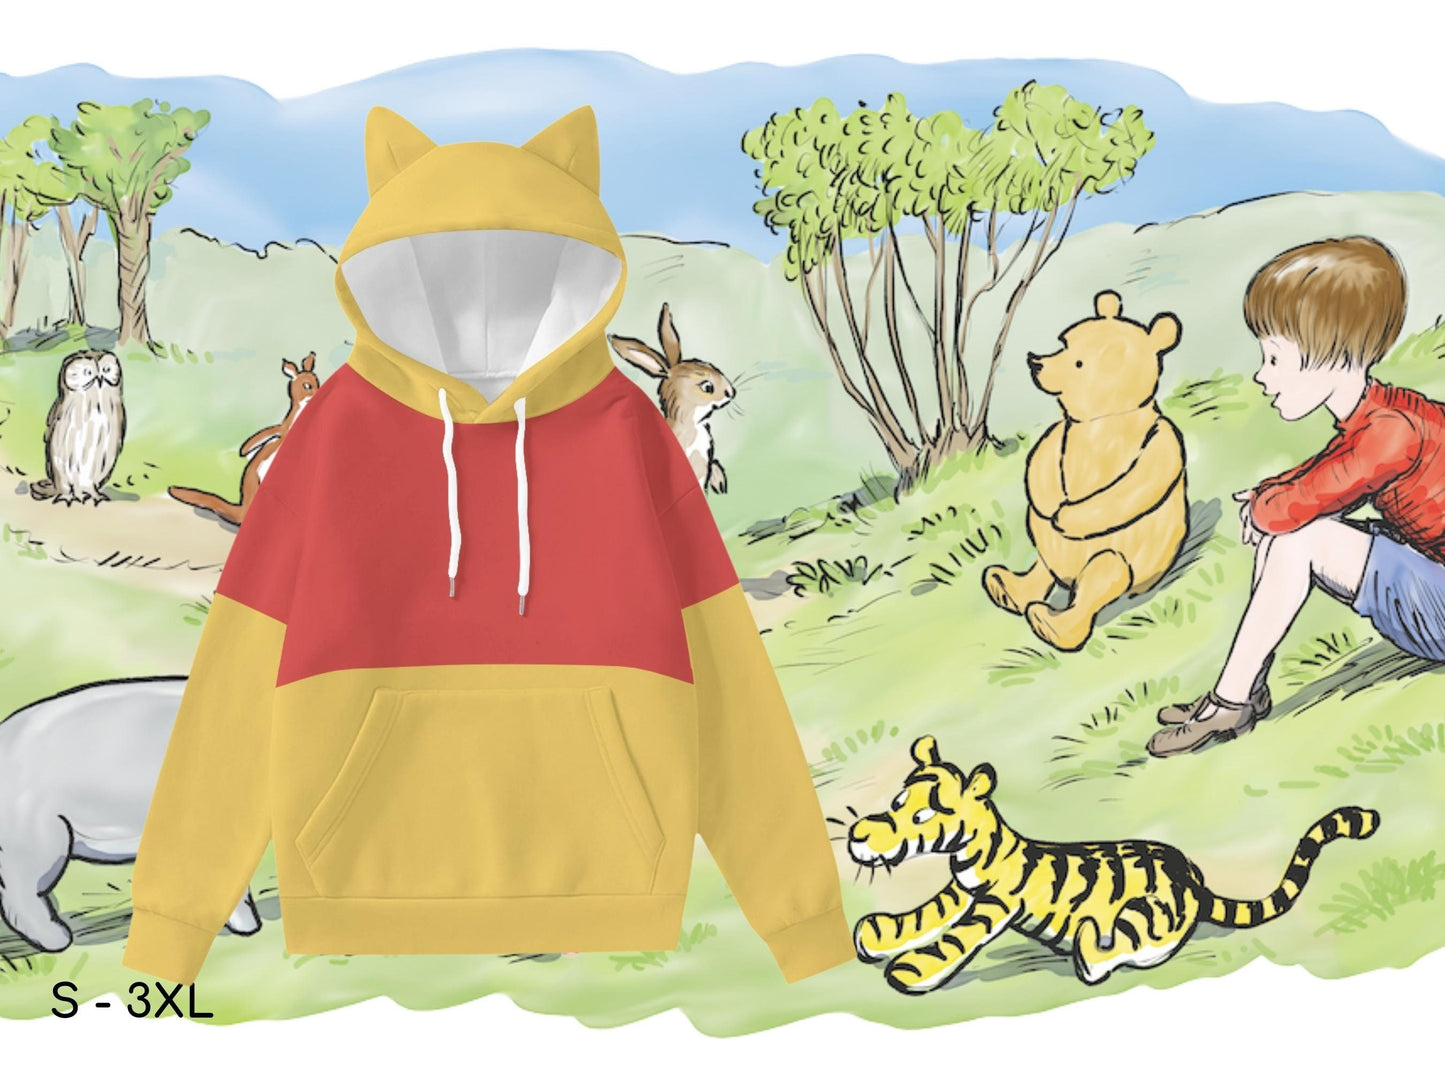 Winnie the Pooh Women's Hoodie with Ears & Leggings, Halloween Adult Costume, Gift for Her, Halloween Costumes, Hundred Acre Wood, Cosplay